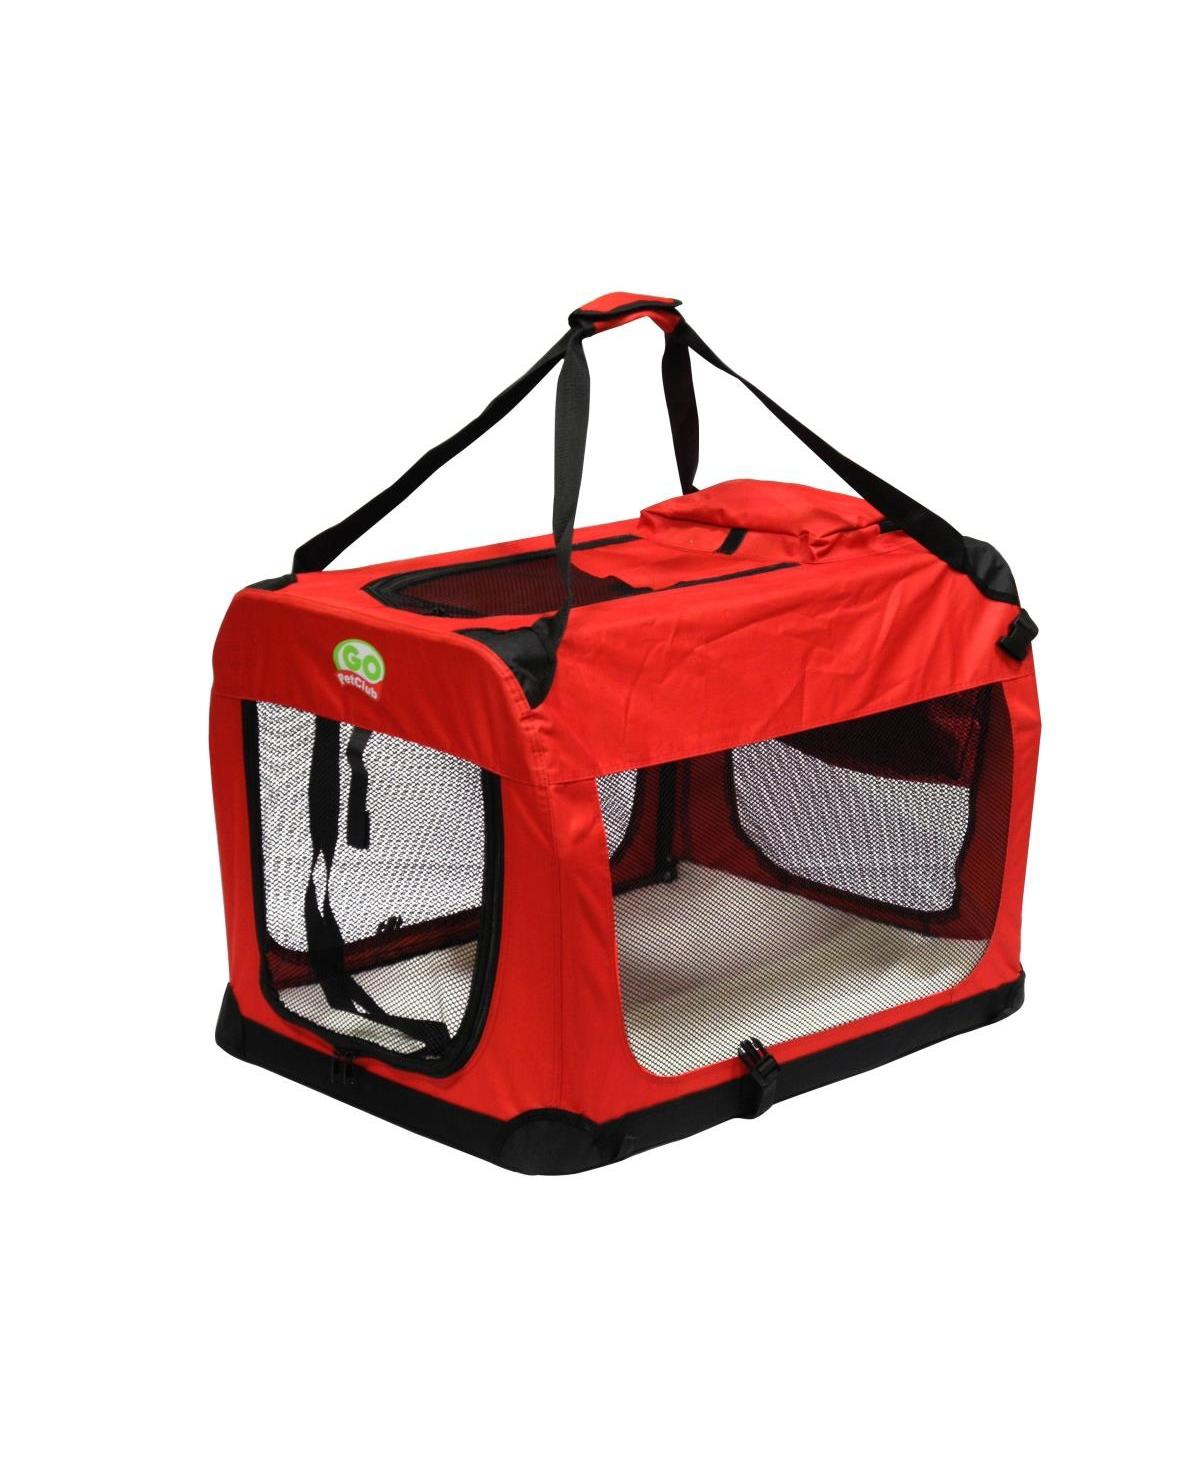 Cp-40 27 in. Foldable Pet Crate, Red - Open miscellaneous